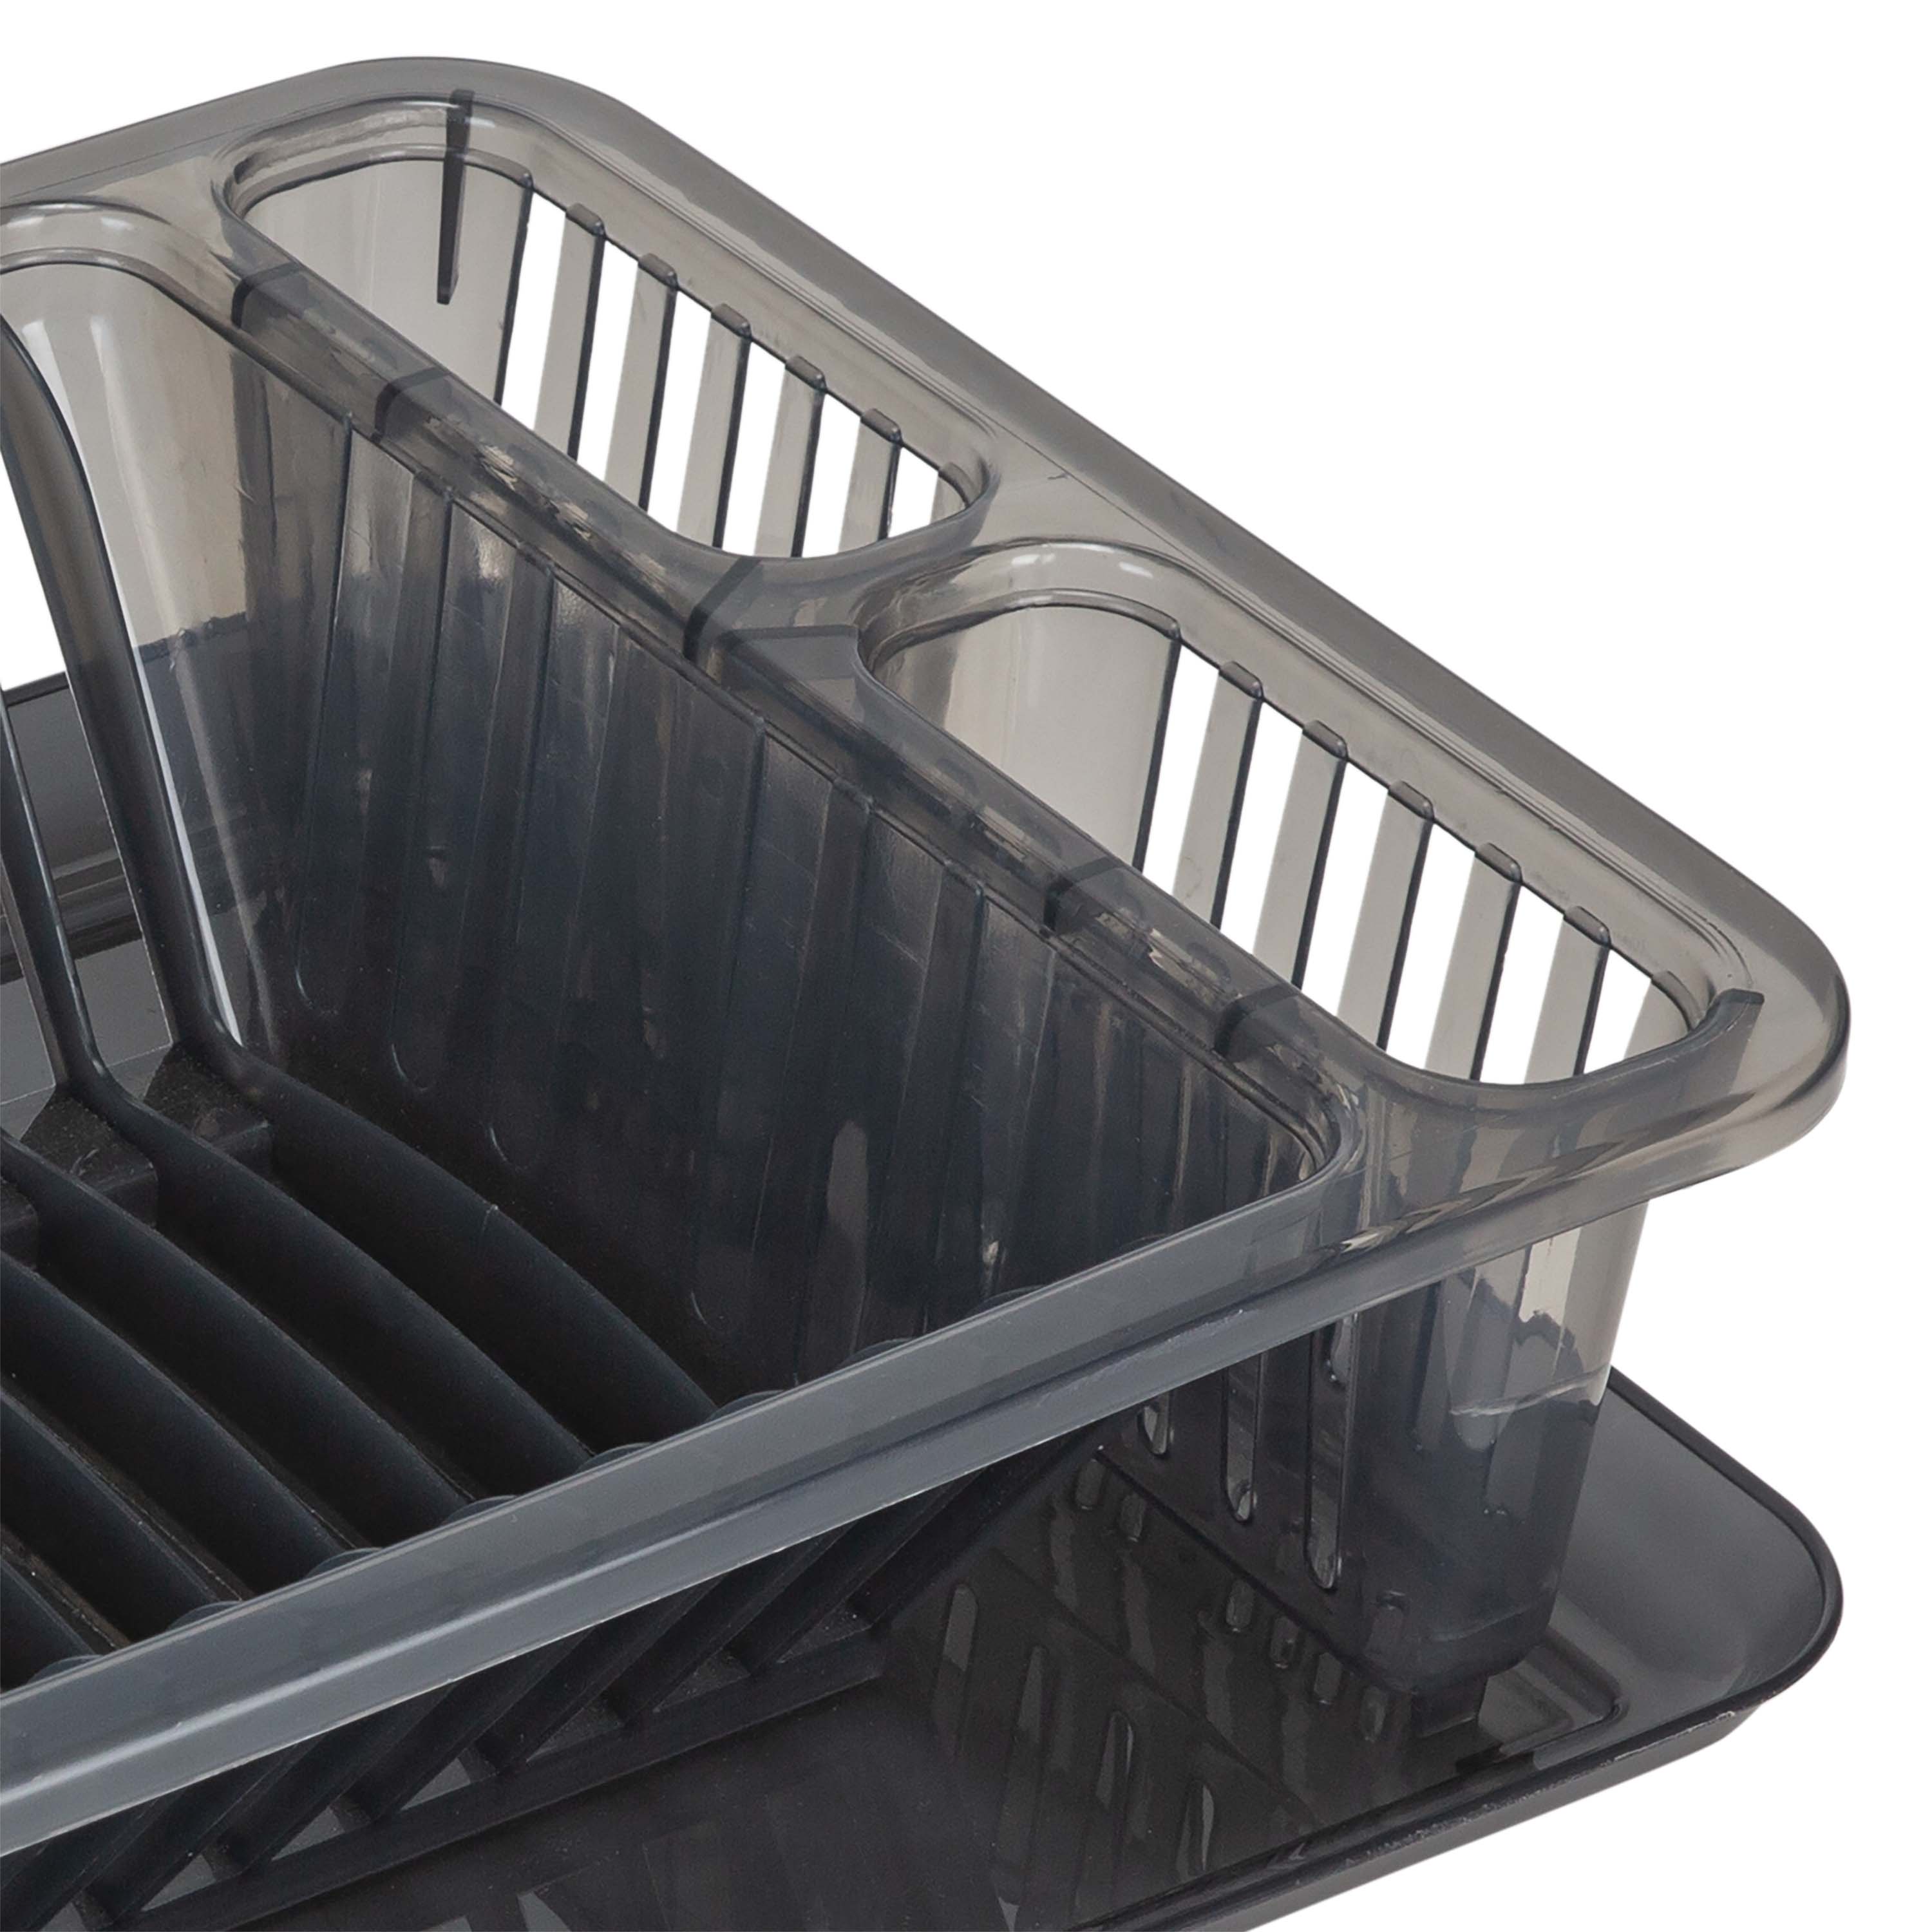 Kitchen Details 11.02-in W x 18.11-in L x 3.54-in H Polypropylene Dish Rack  and Drip Tray